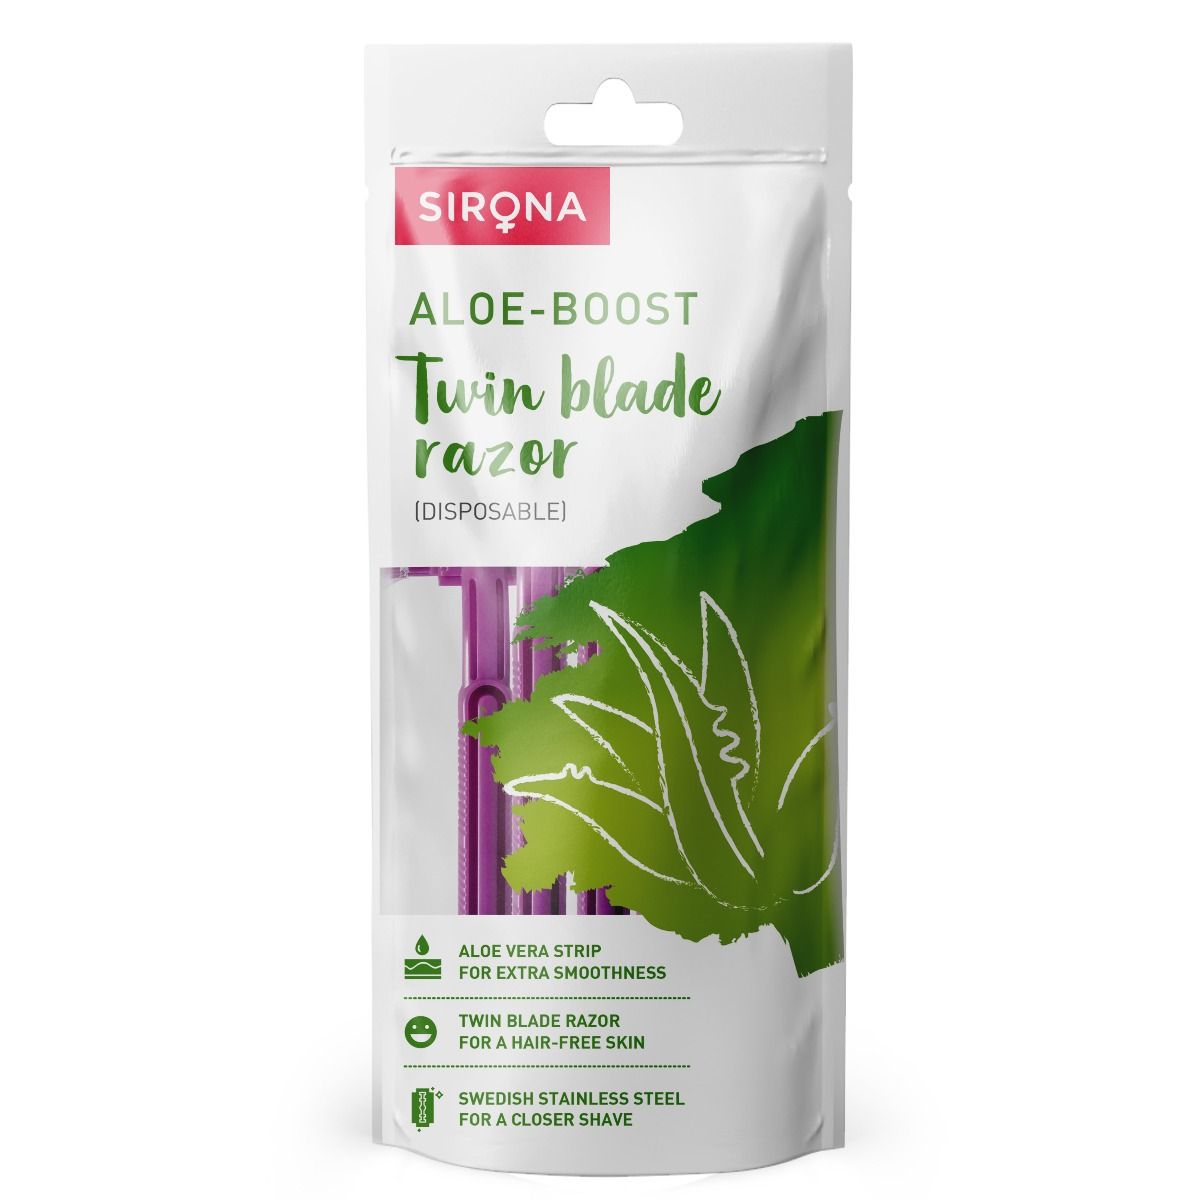 Sirona Aloe-Boost Disposable Twin Blade Razor For Women, 5 Count, Pack of 1 